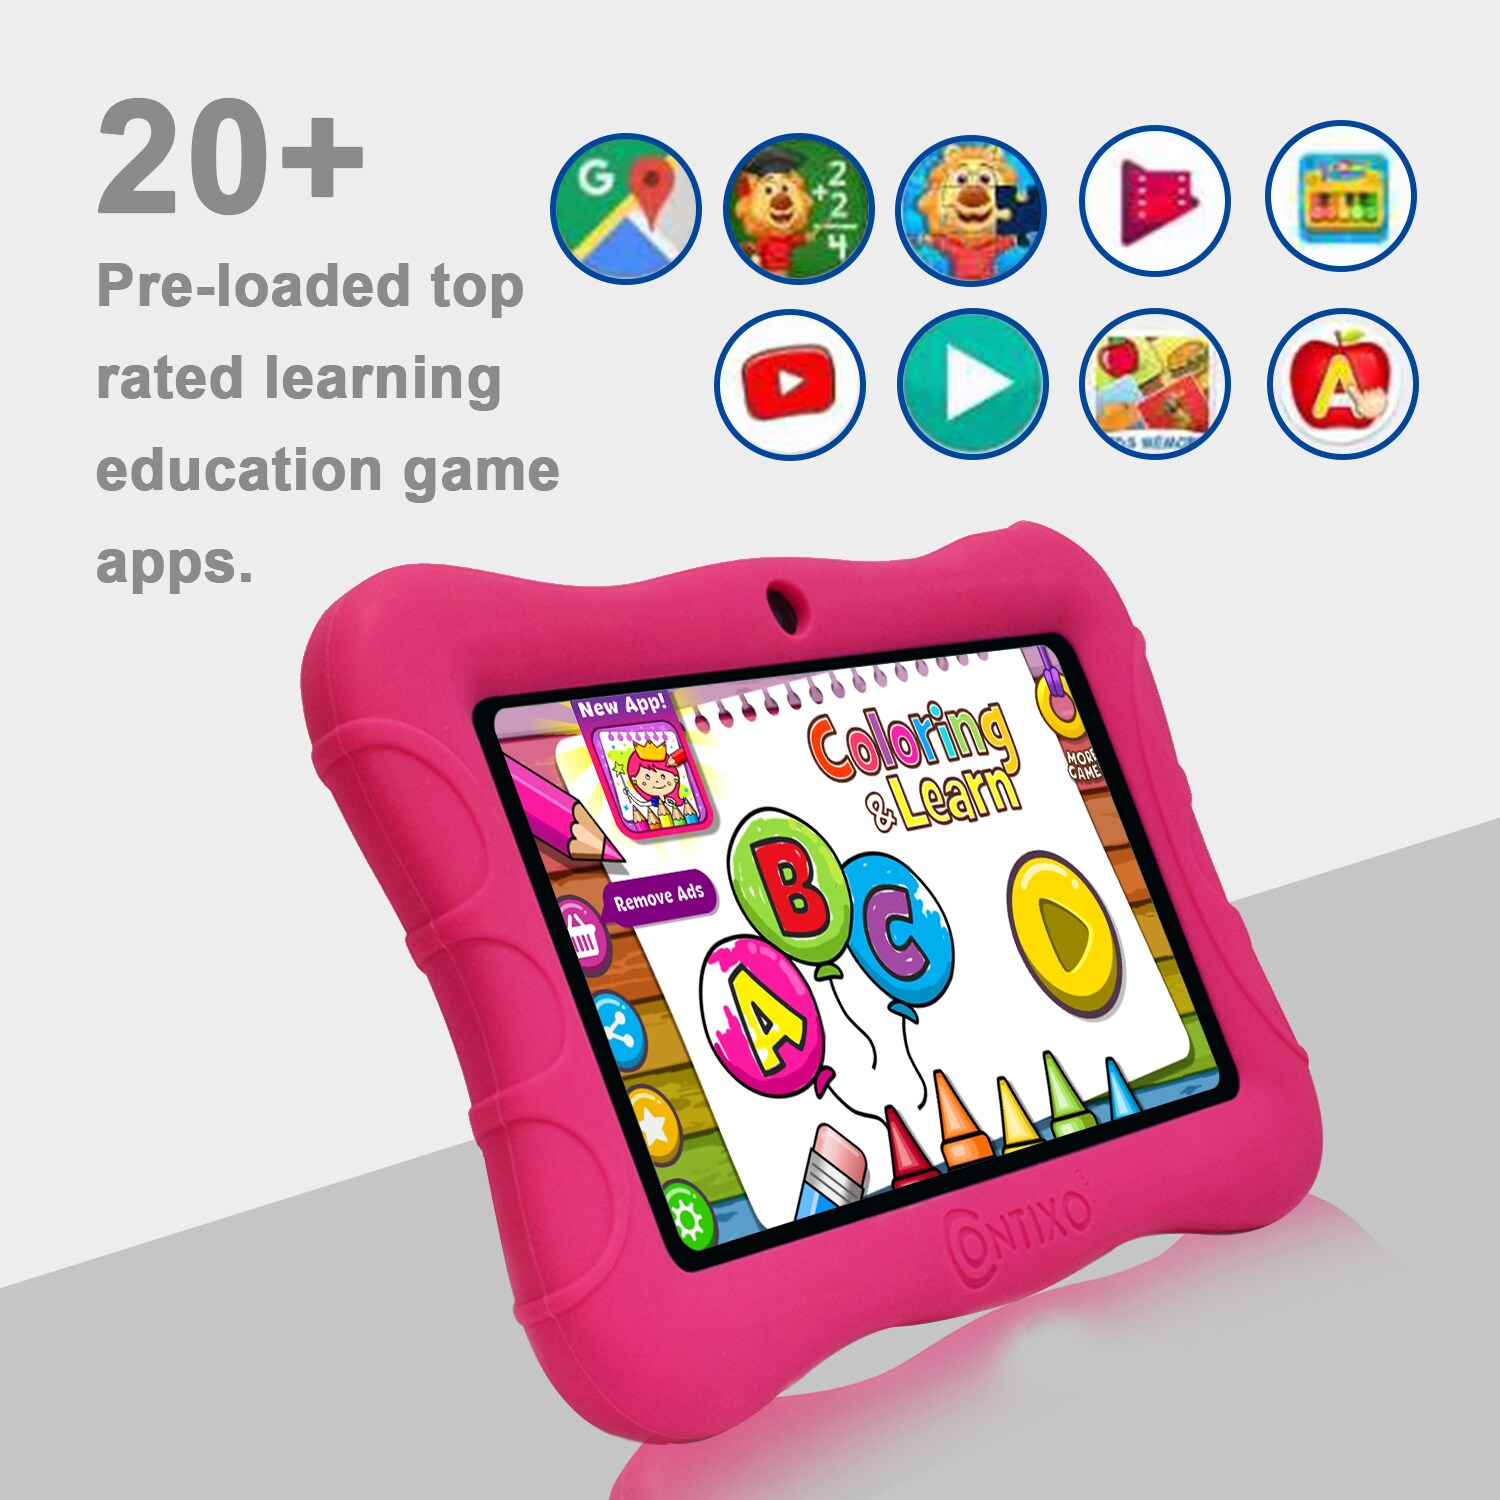 Contixo Contixo 7 inch Kids Tablet 2GB Ram 32GB Data Storage with Latest Android 10 OS Wi-Fi Blue Tooth Tablets for Kids, V9-3-32-Pink